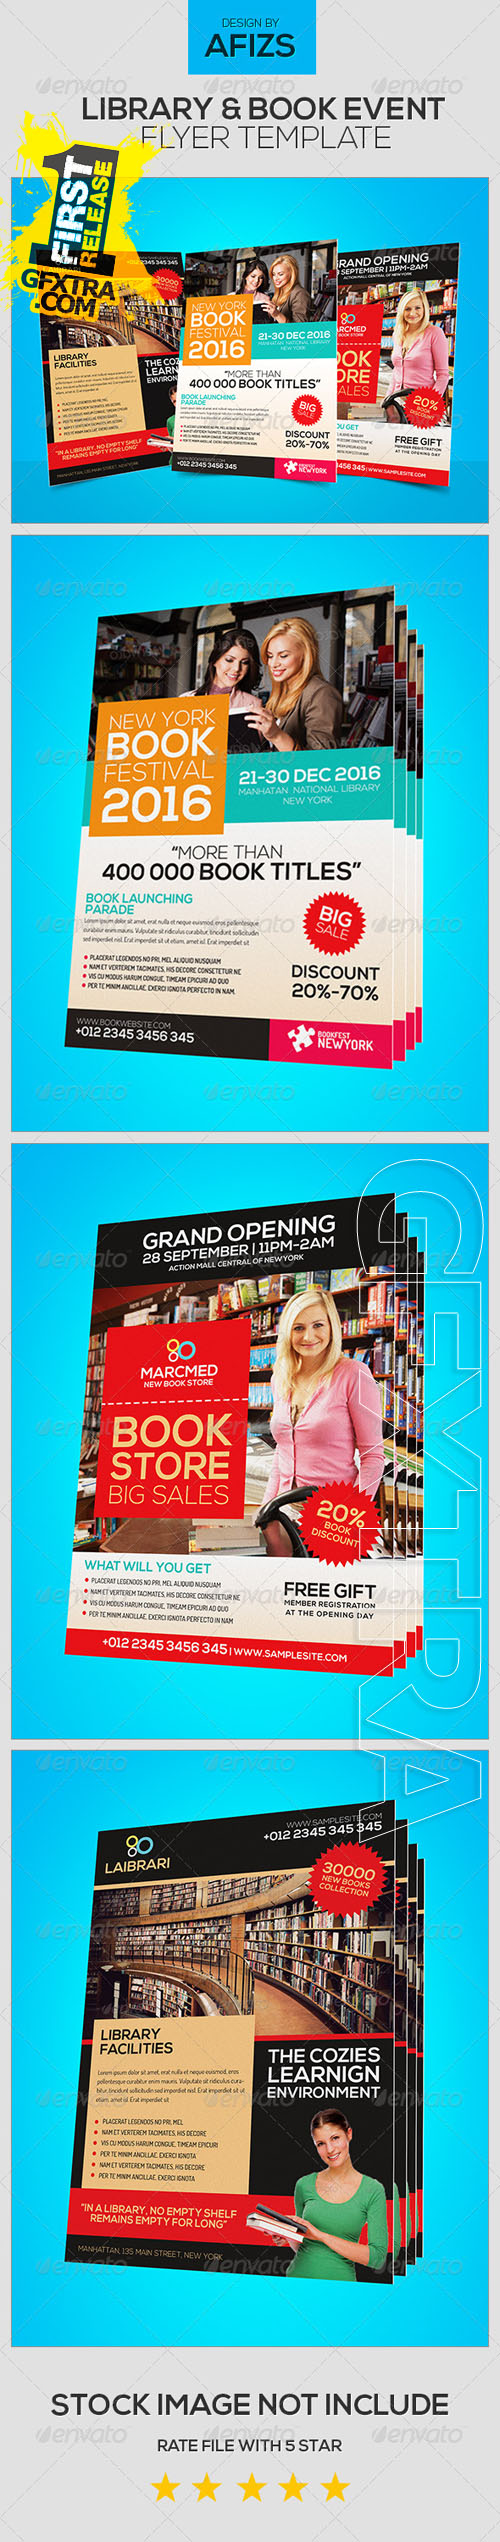 GraphicRiver - Library & Book Event Flyer